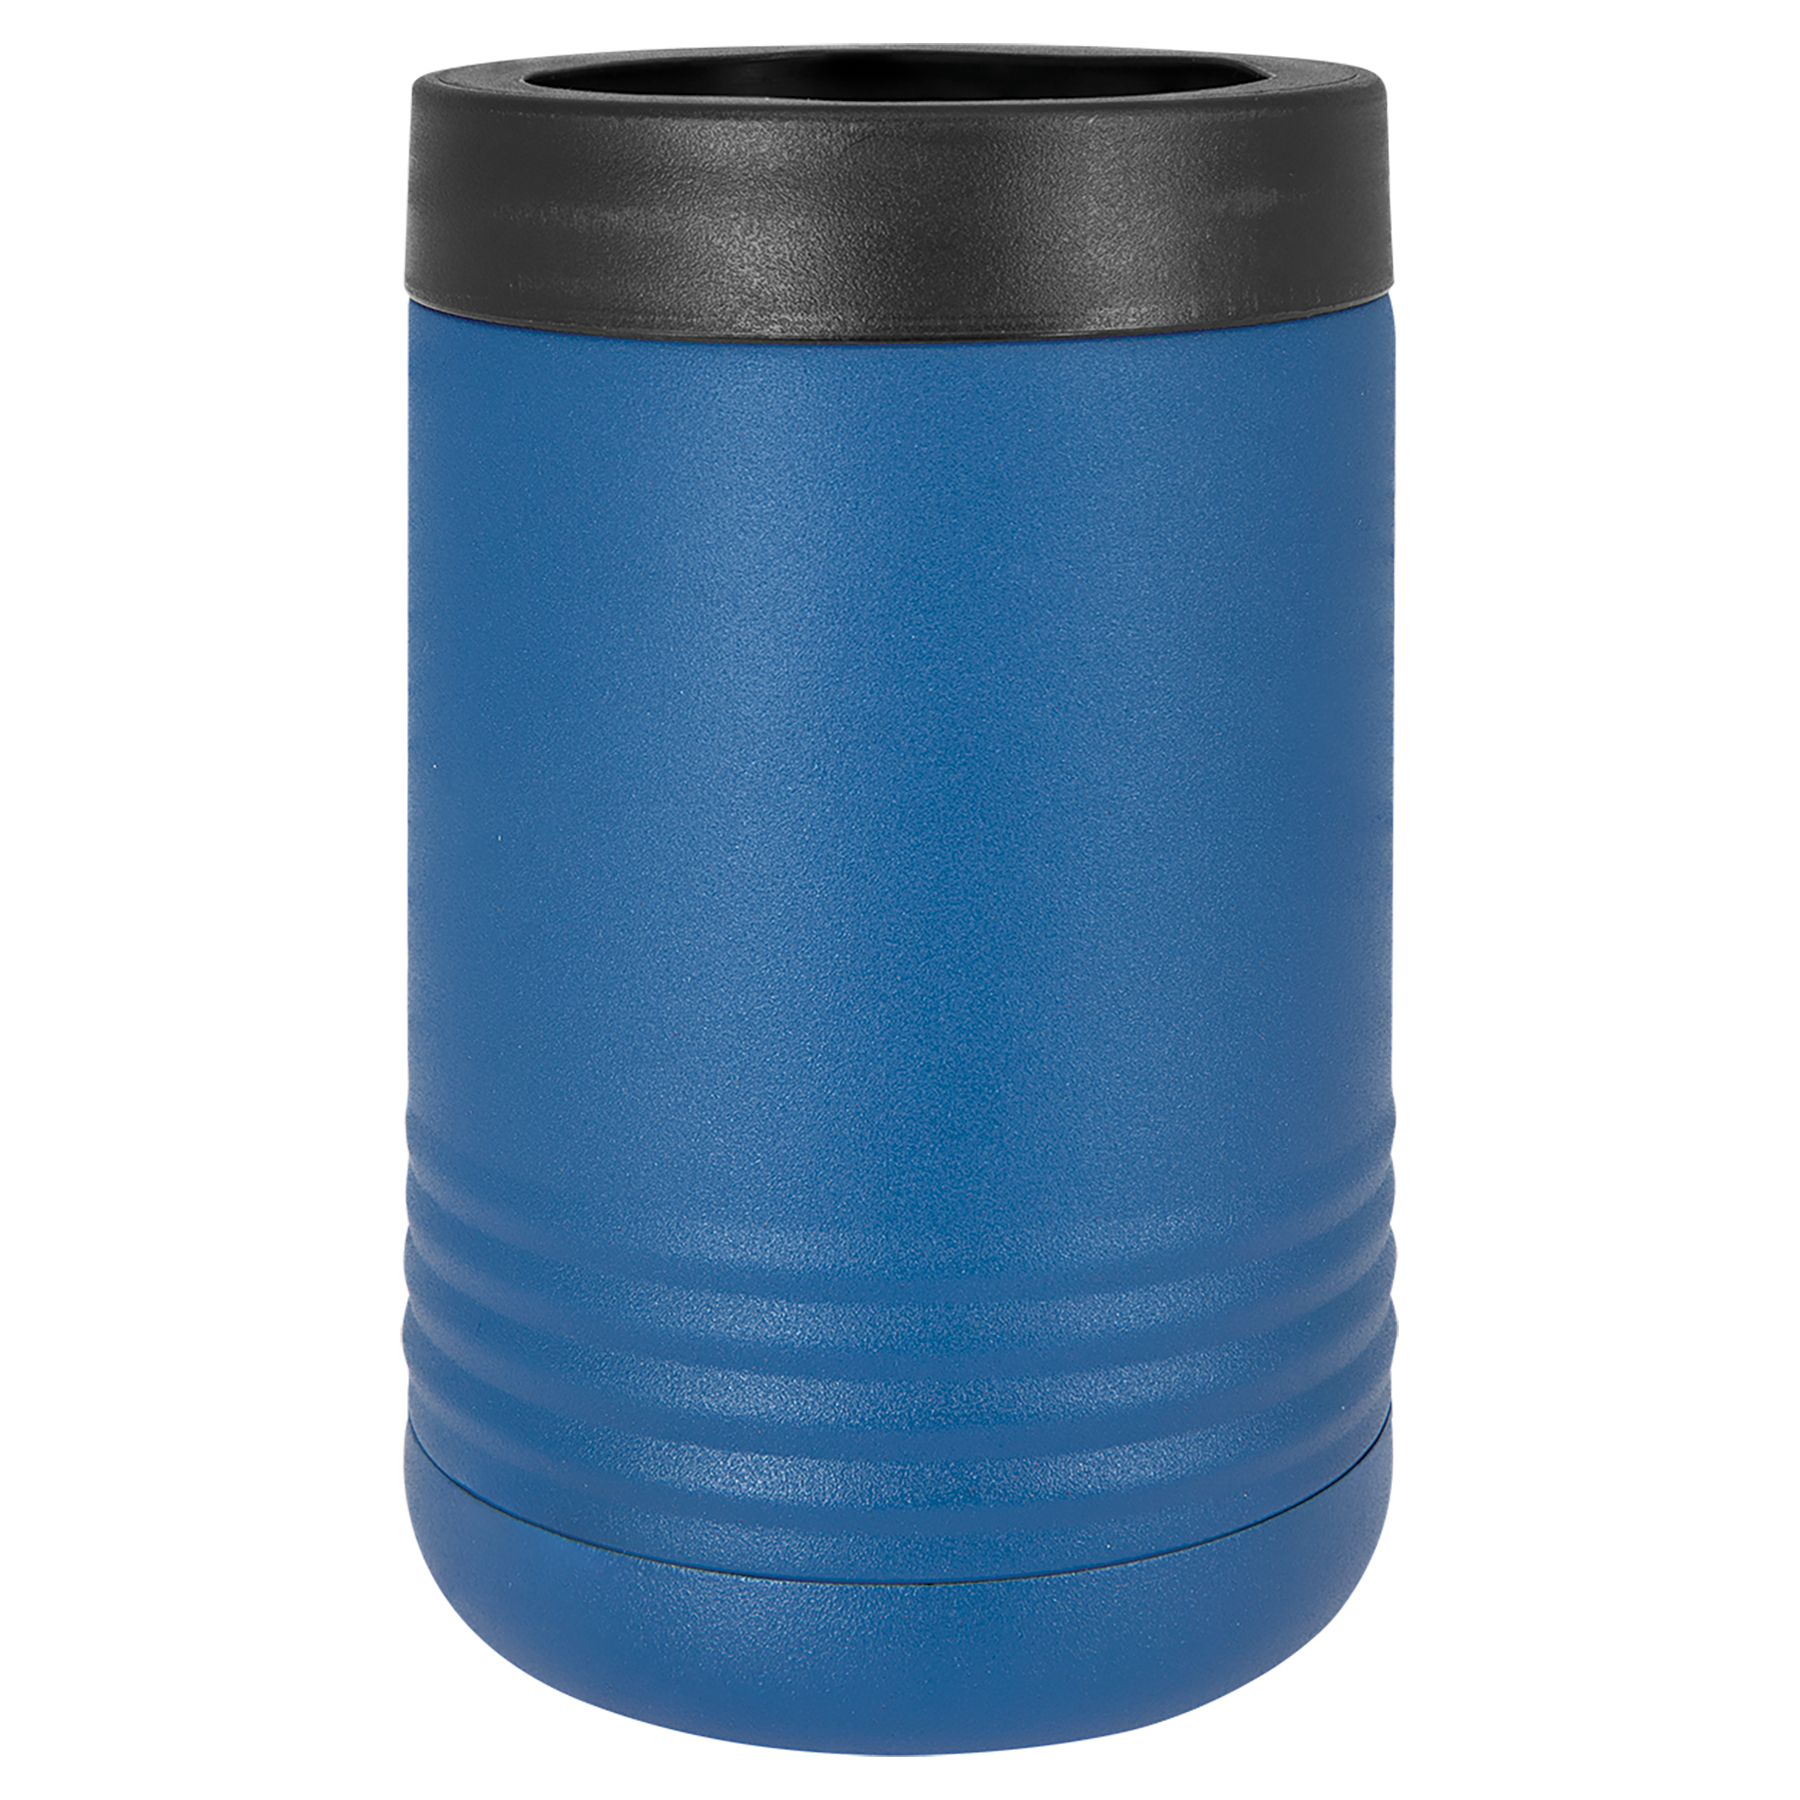 Royal Blue Beverage Holder-One Free Engraving -Double-wall Vacuum Insulated -Made from 18/8 Gauge Stainless Steel (Type 304 Food Grade) -Fits most 12oz and 16oz Cans and 12oz Bottles -Not recommended for Dishwasher -Works with Cold and Hot Drinks -18 Color Options -Perfect for Personalized Gifts, Awards, Incentives, Swag & Fundraisers